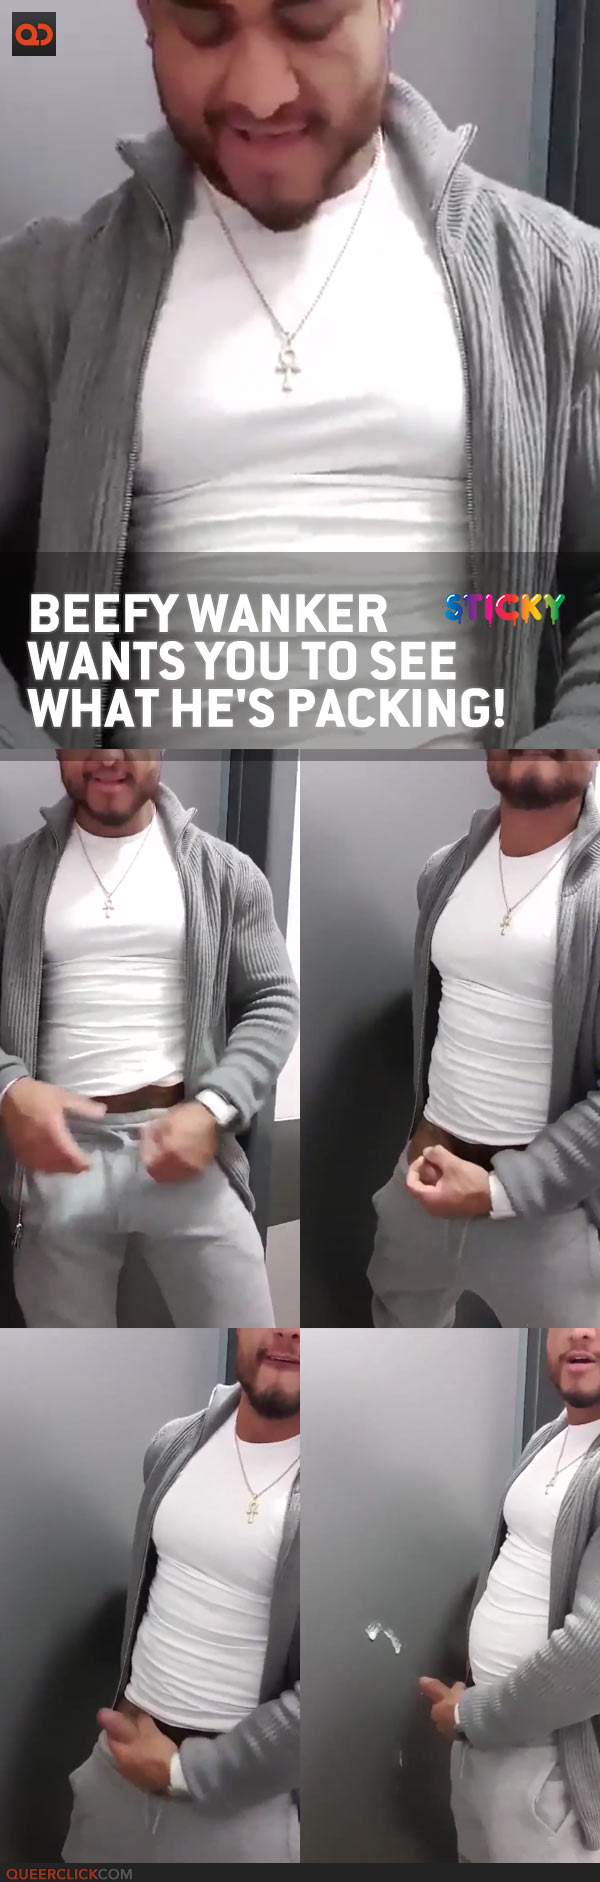 Beefy Wanker Wants You To See What He's Packing!